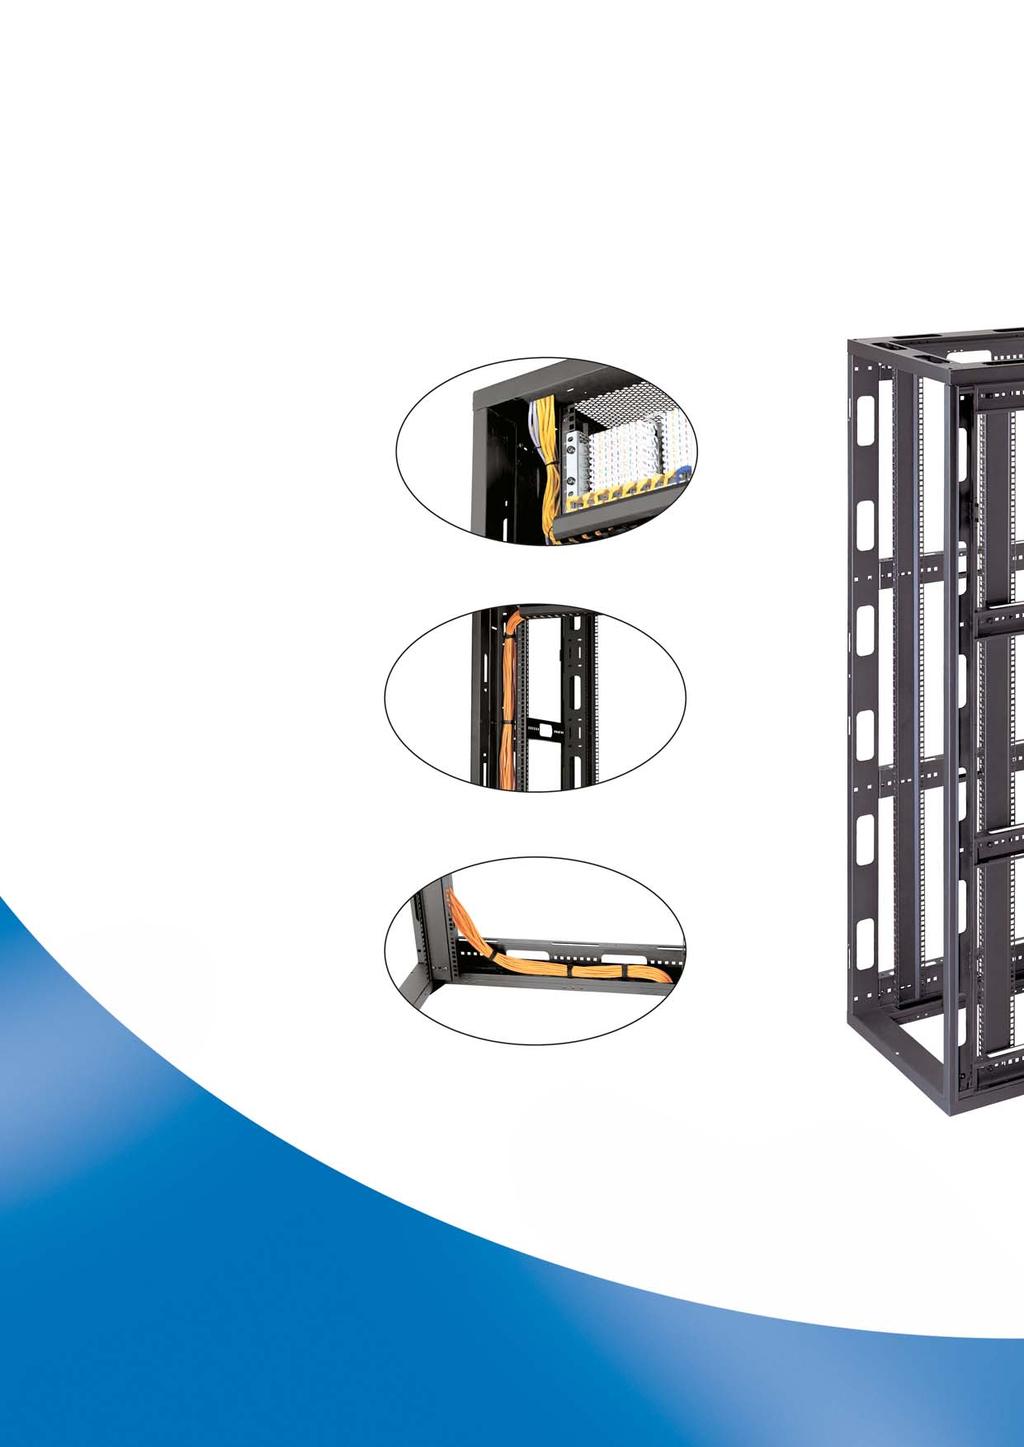 Efficient Cable Management In today's data centres, the use of enclosures not specifically designed for high density equipment applications can lead to unsightly, often incorrectly installed or